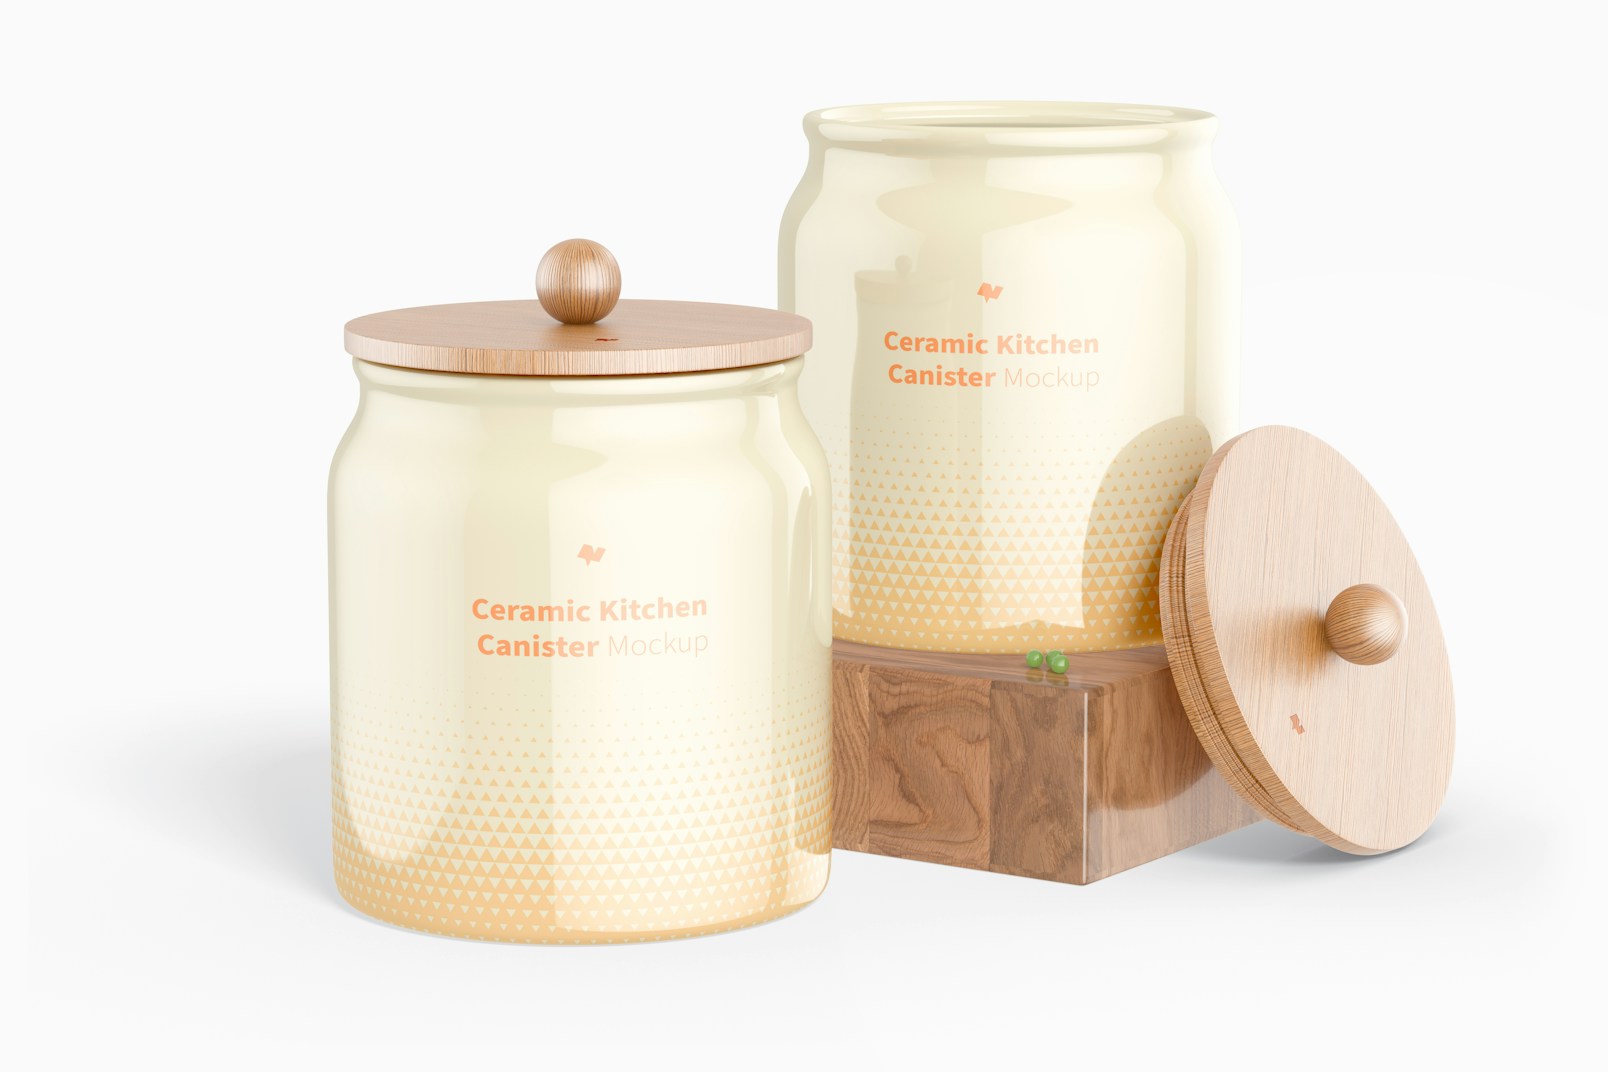 Ceramic Kitchen Canisters Mockup